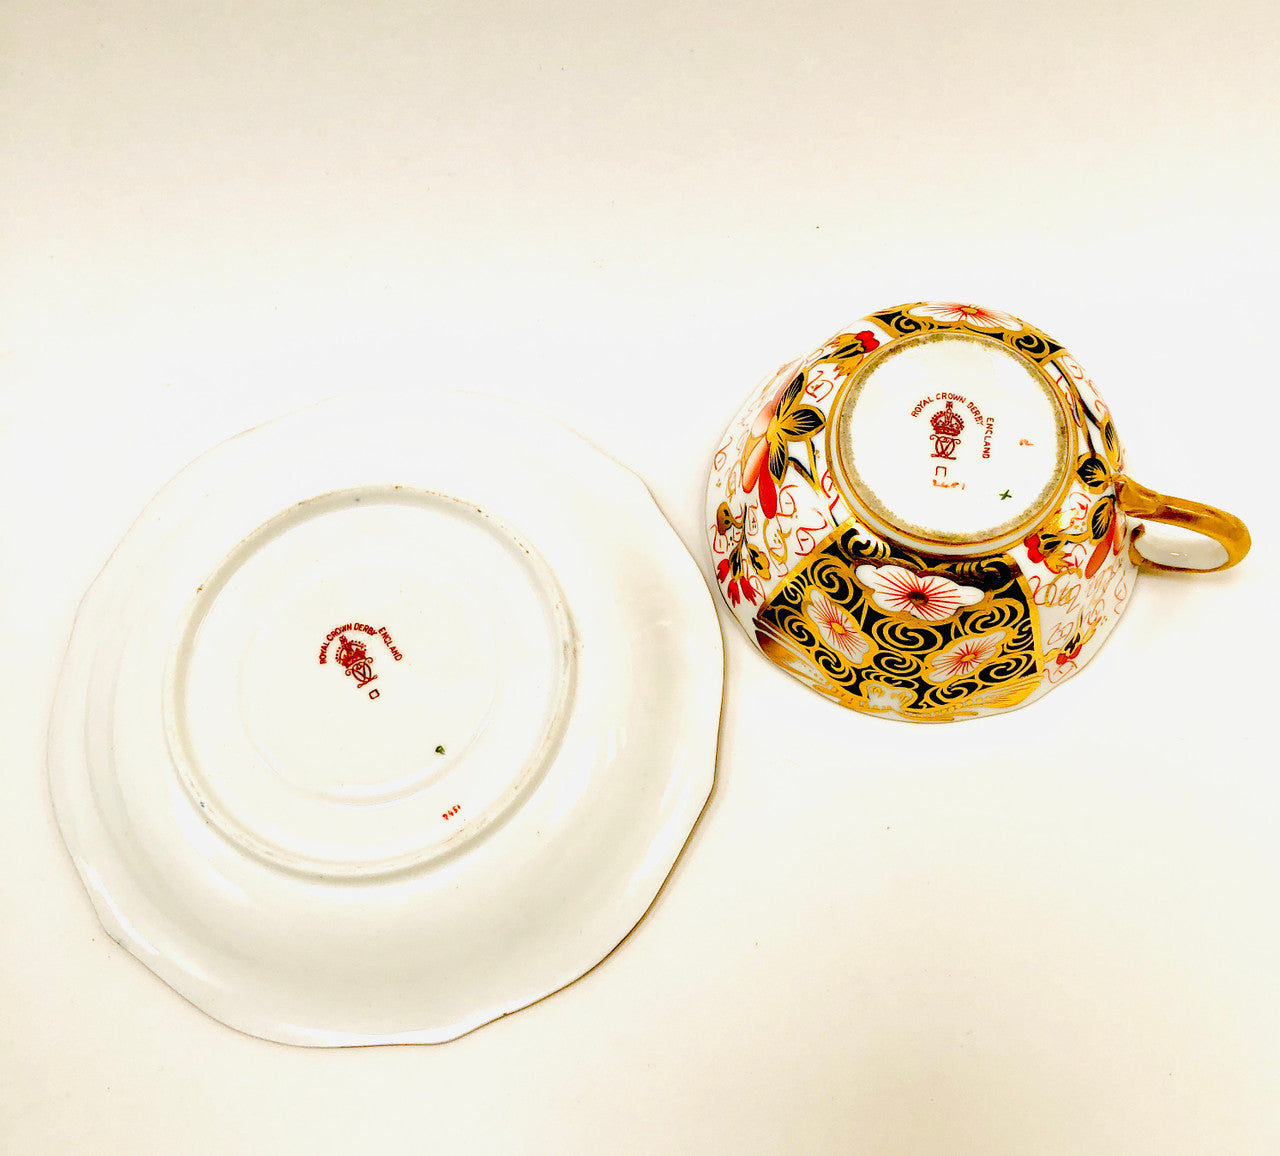 Royal Crown Derby, Traditional Imari Pattern, Cup and Saucer, Blue, Red, Gold, Porcelain, 1911-1912, Antique